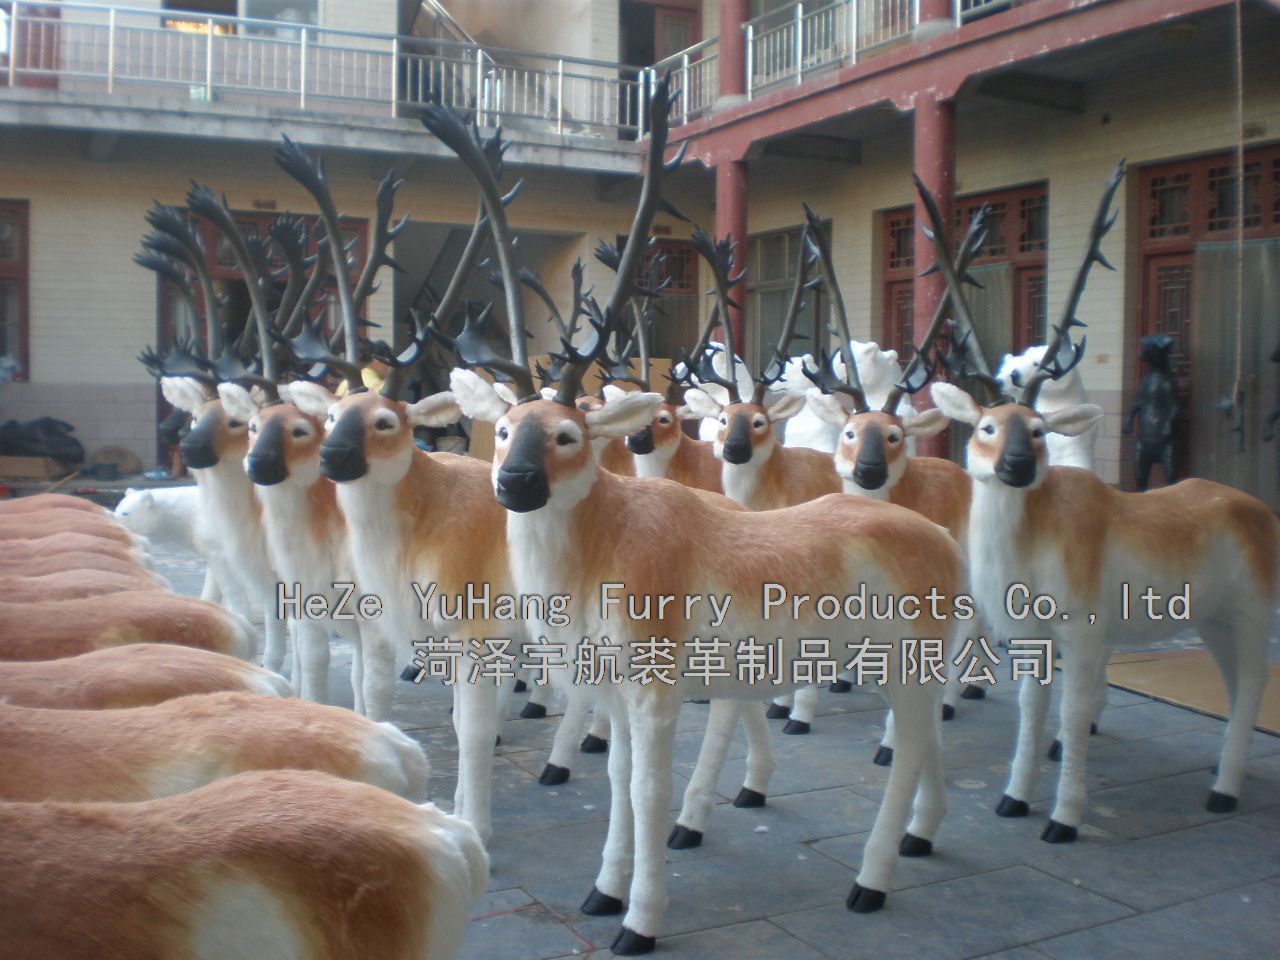 Workshop,HEZE YUHANG FURRY PRODUCTS CO., LTD.